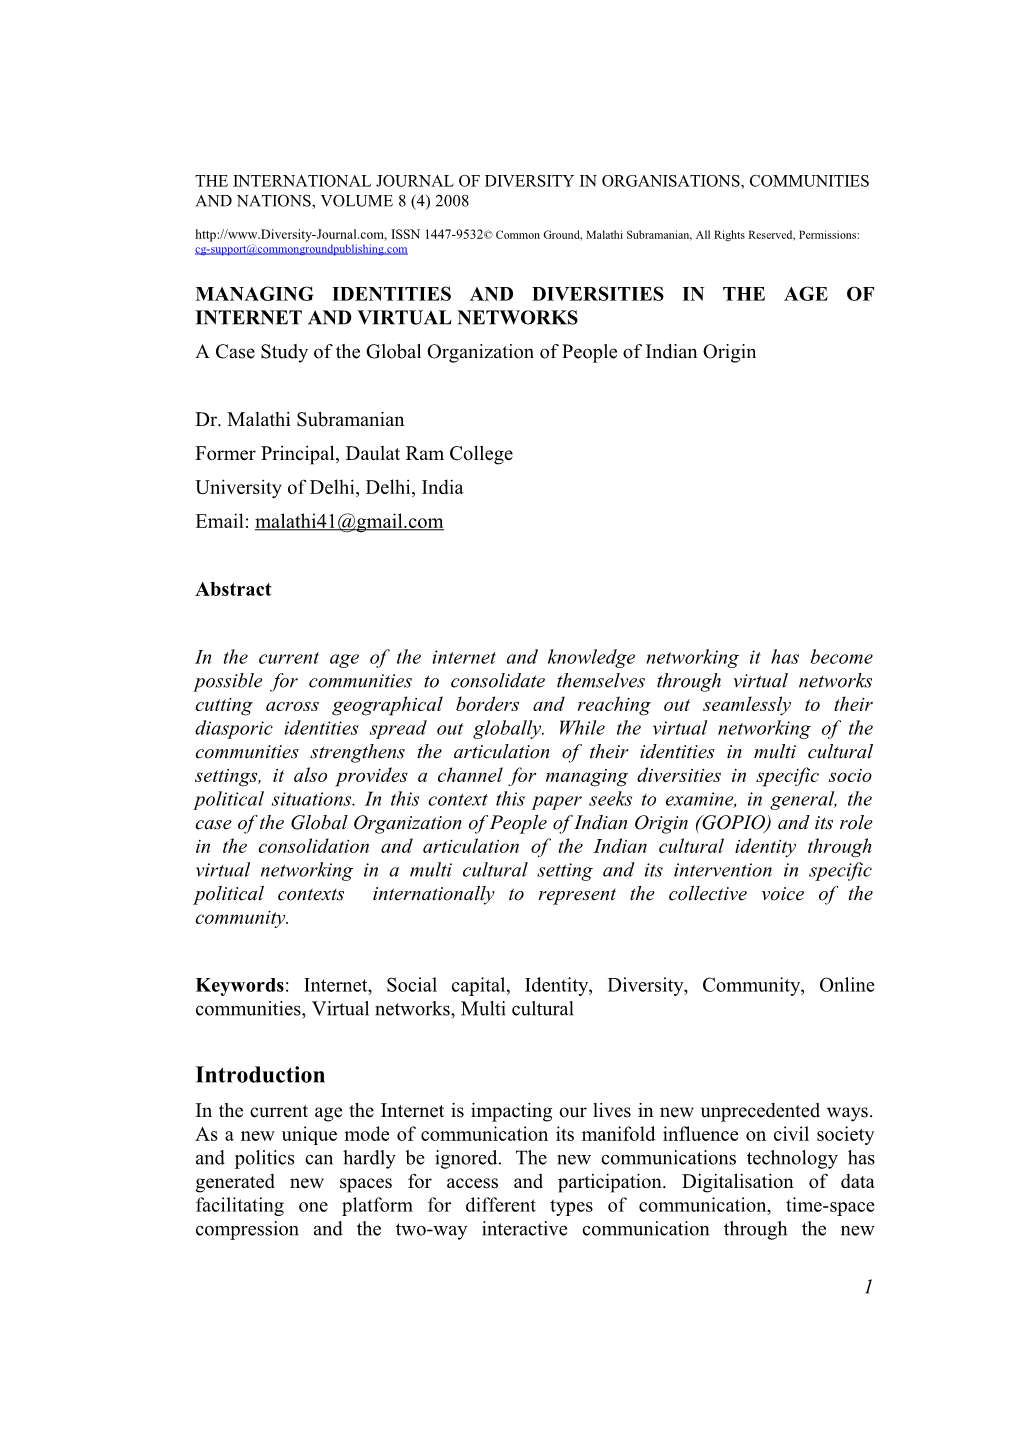 The International Journal of Diversity in Organisations, Communities and Nations, Volume